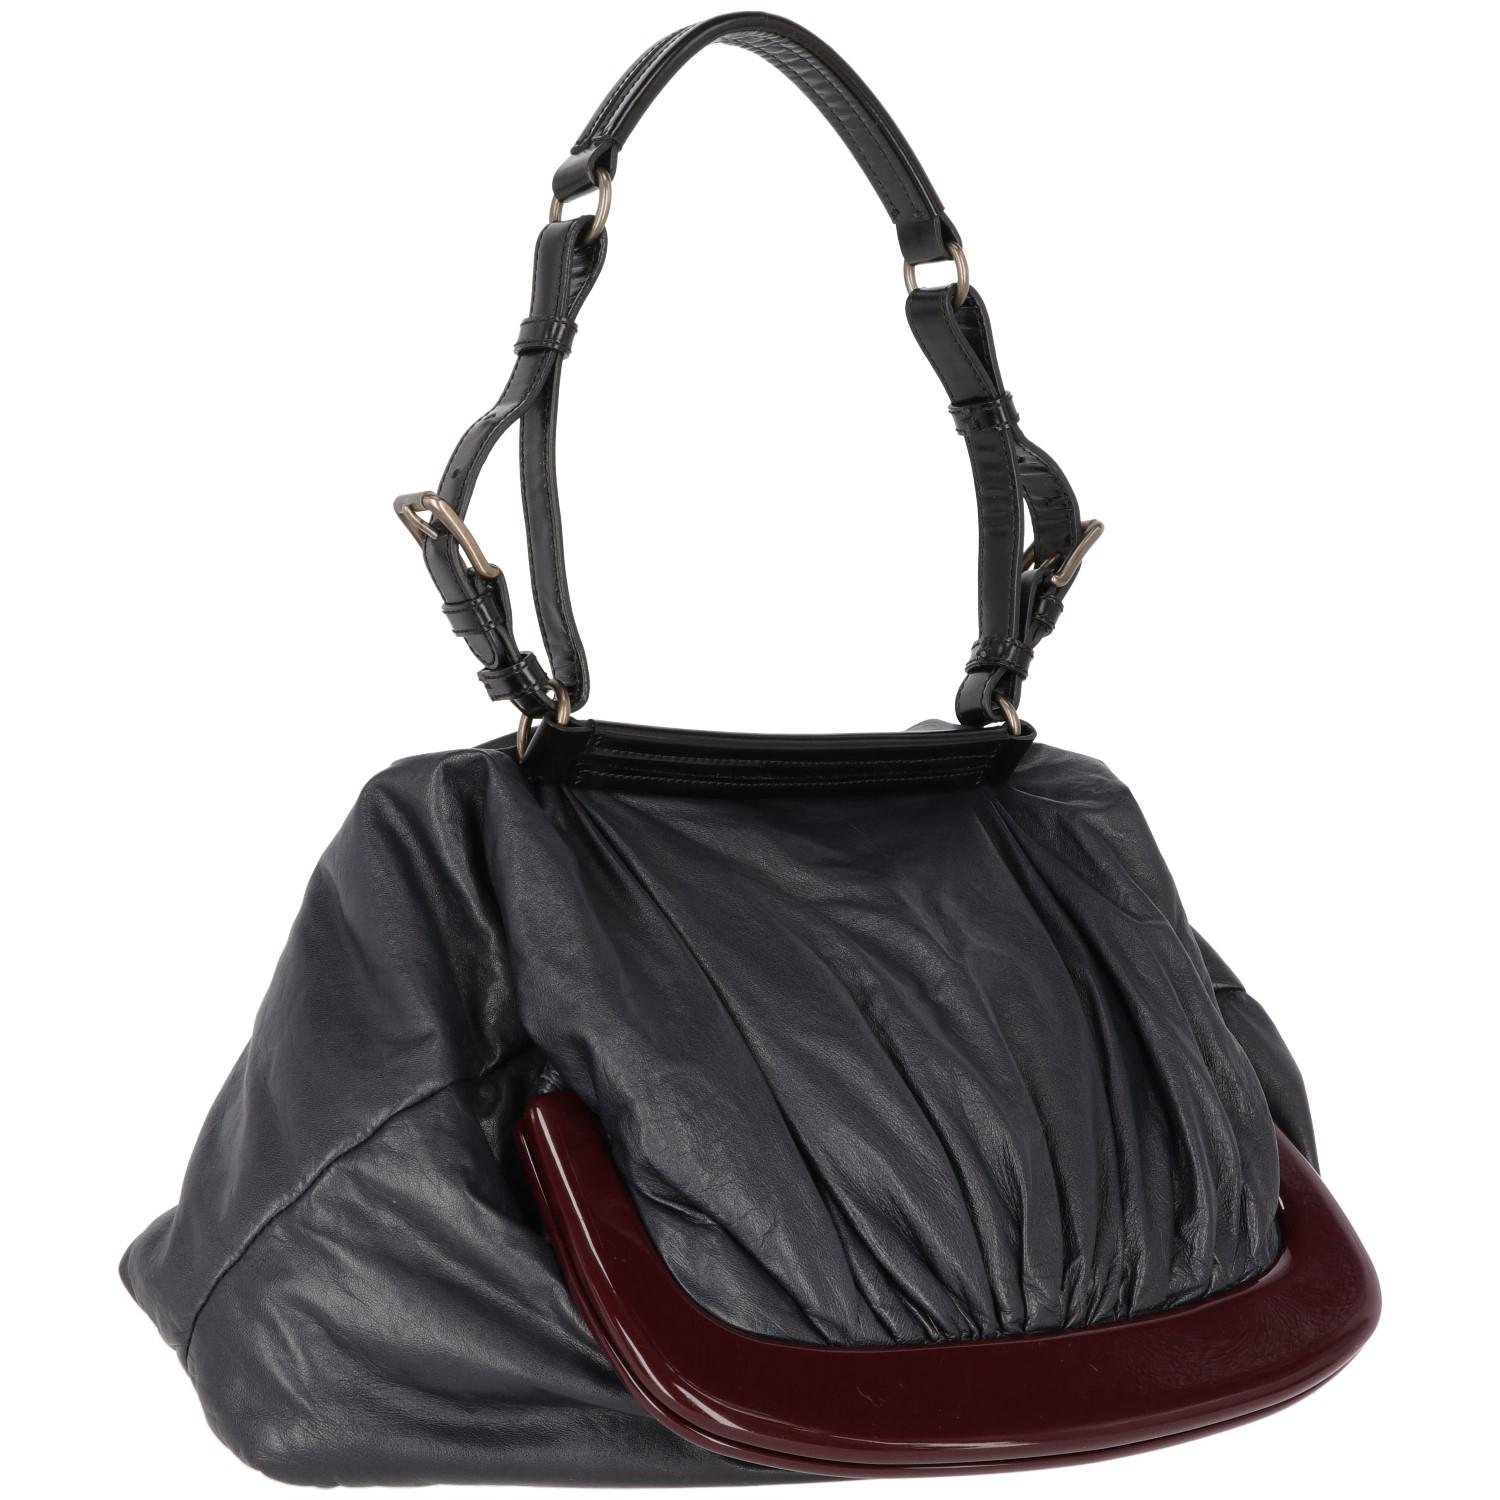 The original Marni blue nappa leather design tote bag  features a black leather handle and a bordeaux pvc clasp closure. 
The item shows scratches, as shown in the pictures.

Years: 2000s

Made in Italy

Width: 28 cm
Height: 44 cm
Handle: 57 cm